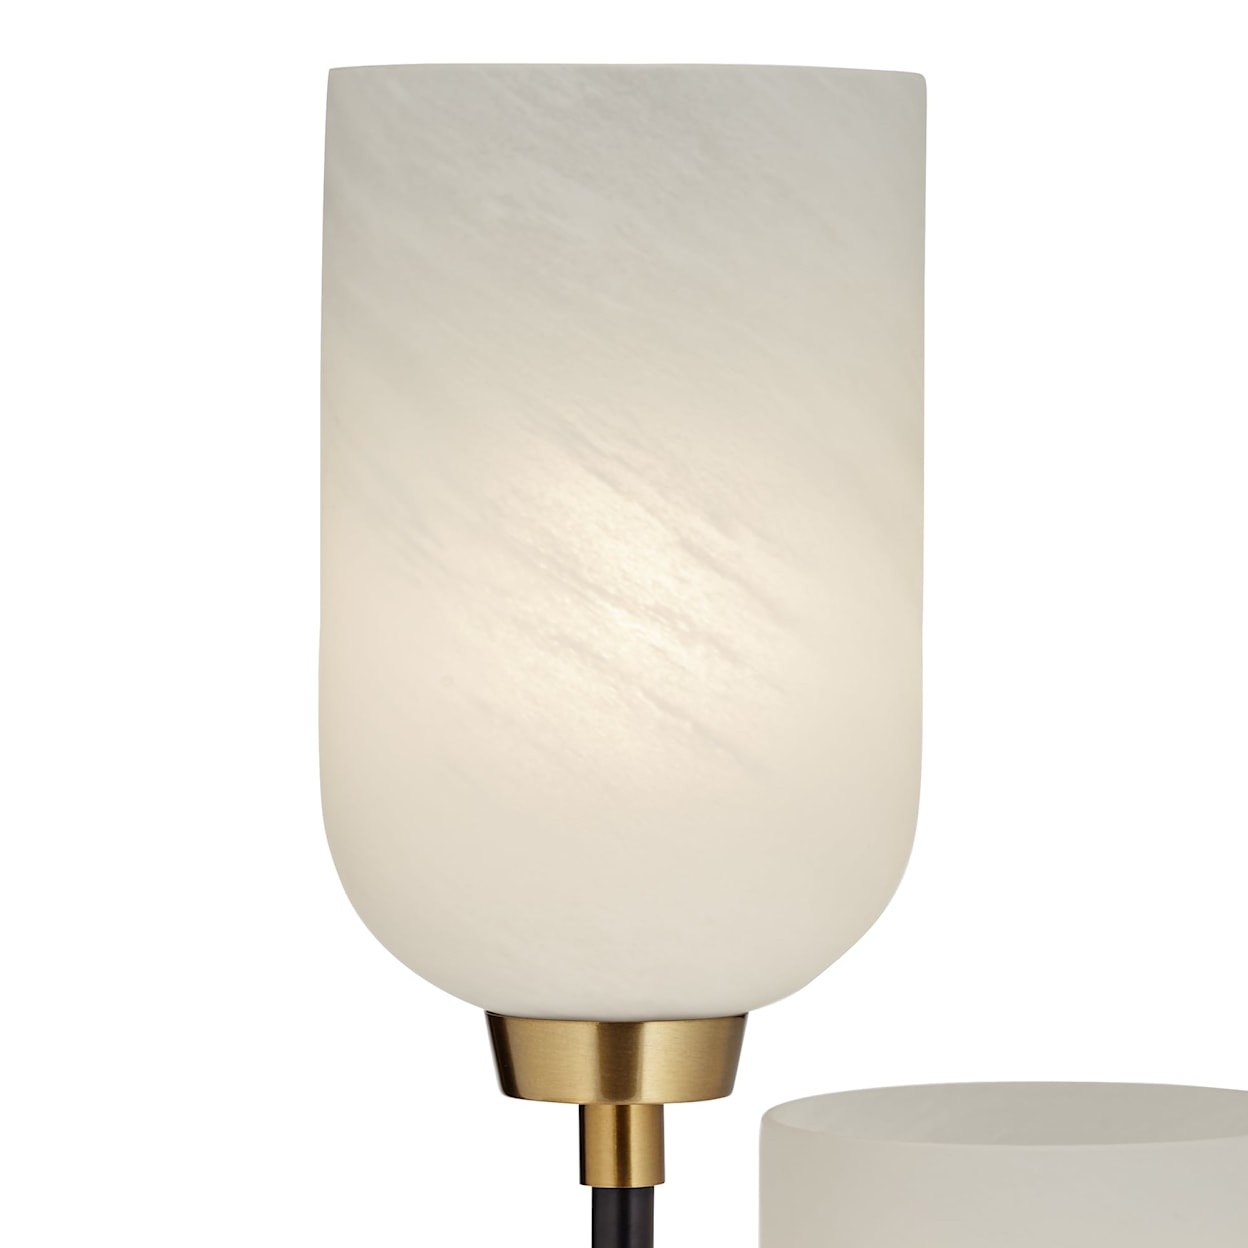 Pacific Coast Lighting Pacific Coast Lighting FL-3 Light with White Alabaster